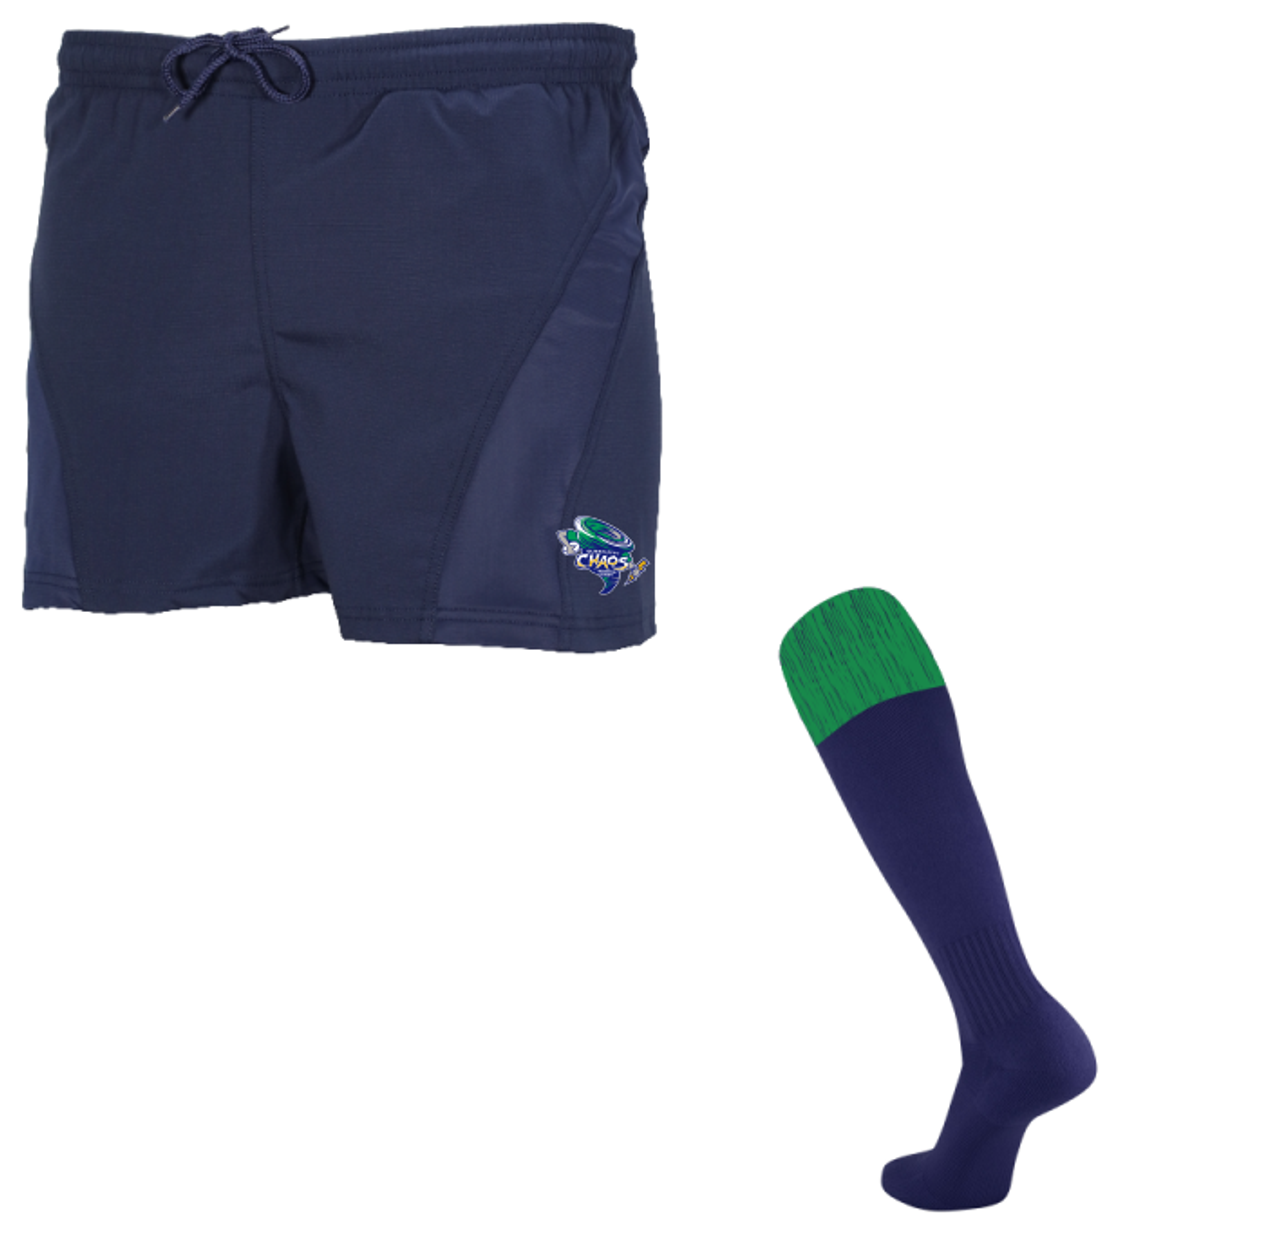 Queen City Chaos Rugby Short/Sock Package